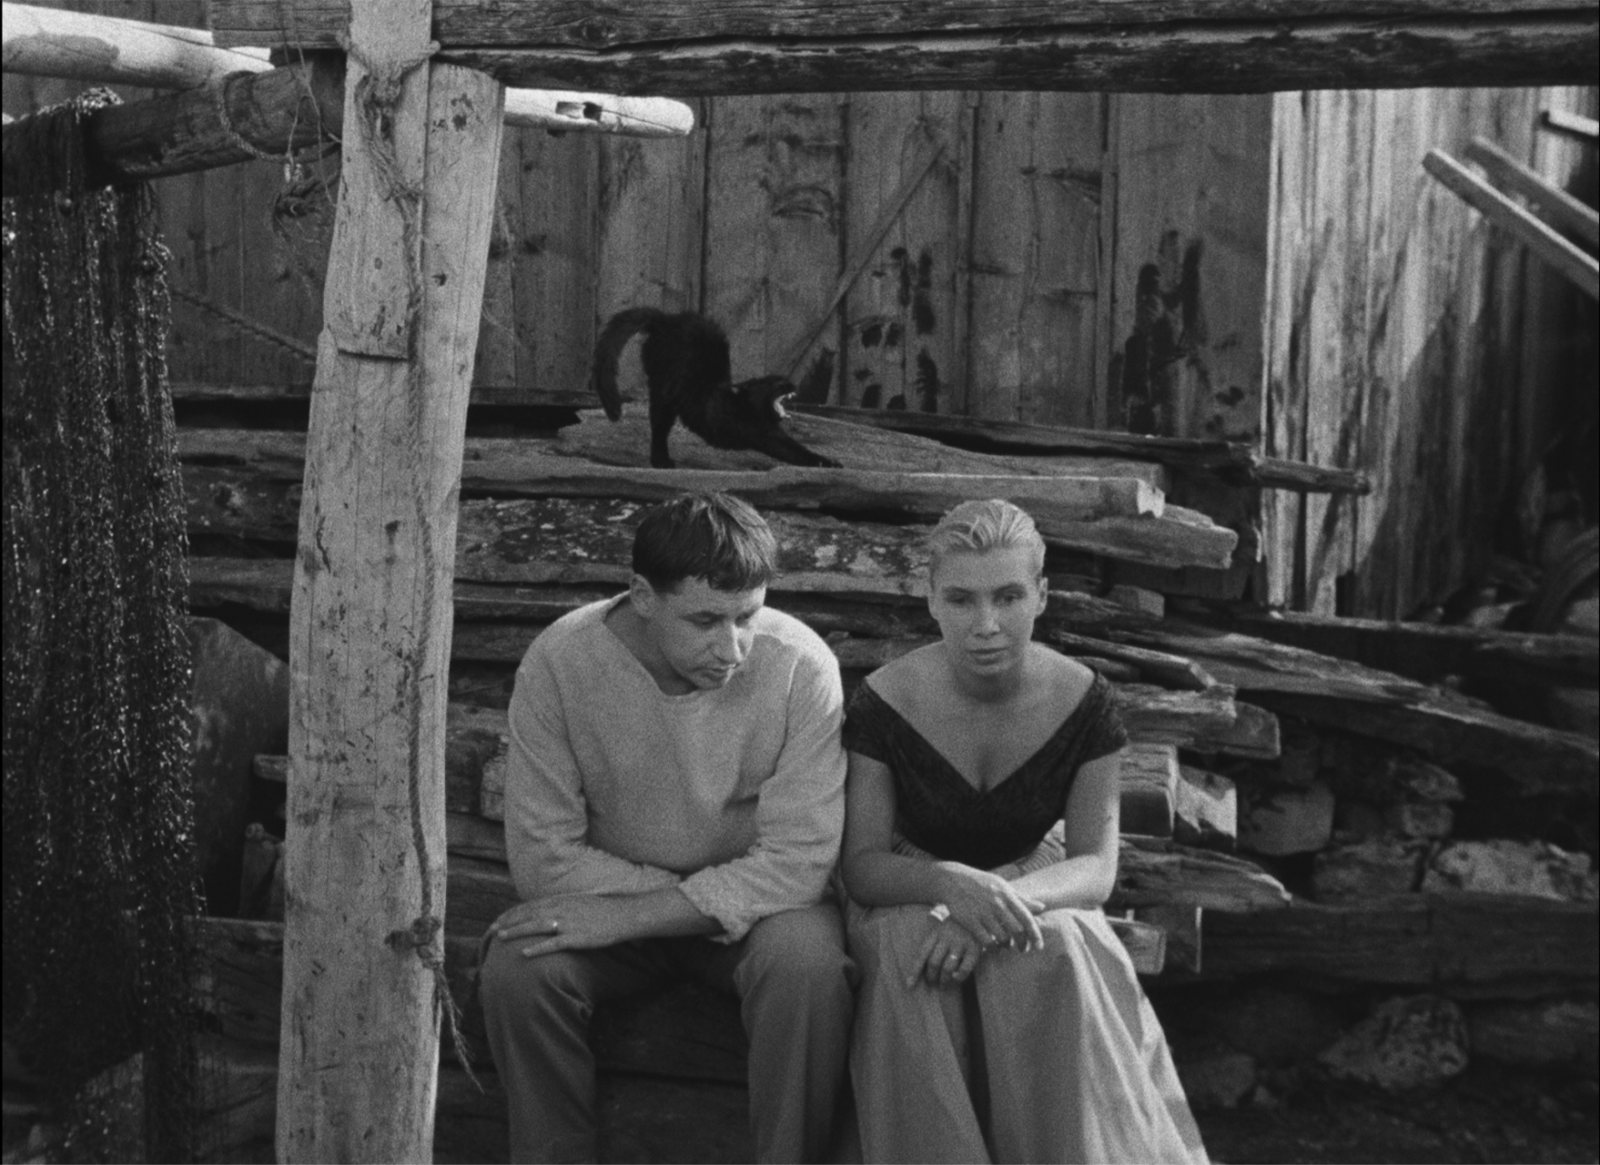 A still from Agnès Varda's 1955 black-and-white film, La Pointe Courte. A young couple, played by actors Philippe Noiret and Silvia Monfort, sit next to one another in front of a shed with a pile of wood and fishing nets. Their arms crossed in front of themselves, he directs his gaze downwards, and she stares unseeing at a point just ahead. A black cat hisses on the woodpile behind them.